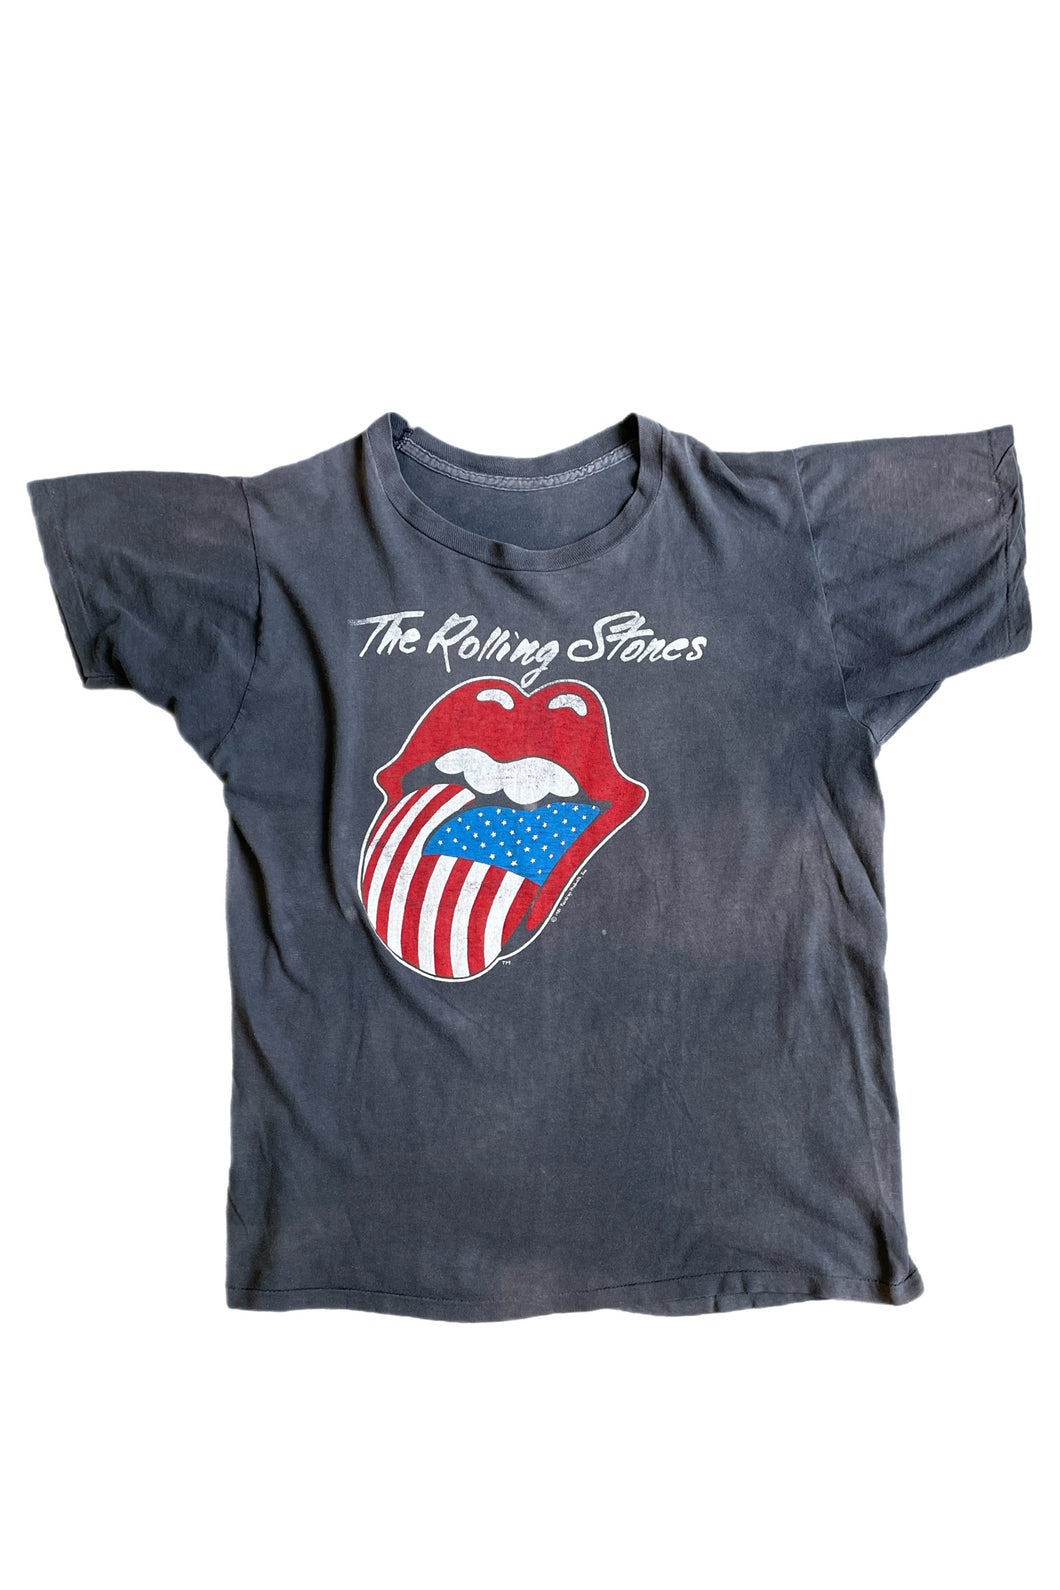 Vintage 1981 The Rolling Stones faded and soft Tour T-Shirt